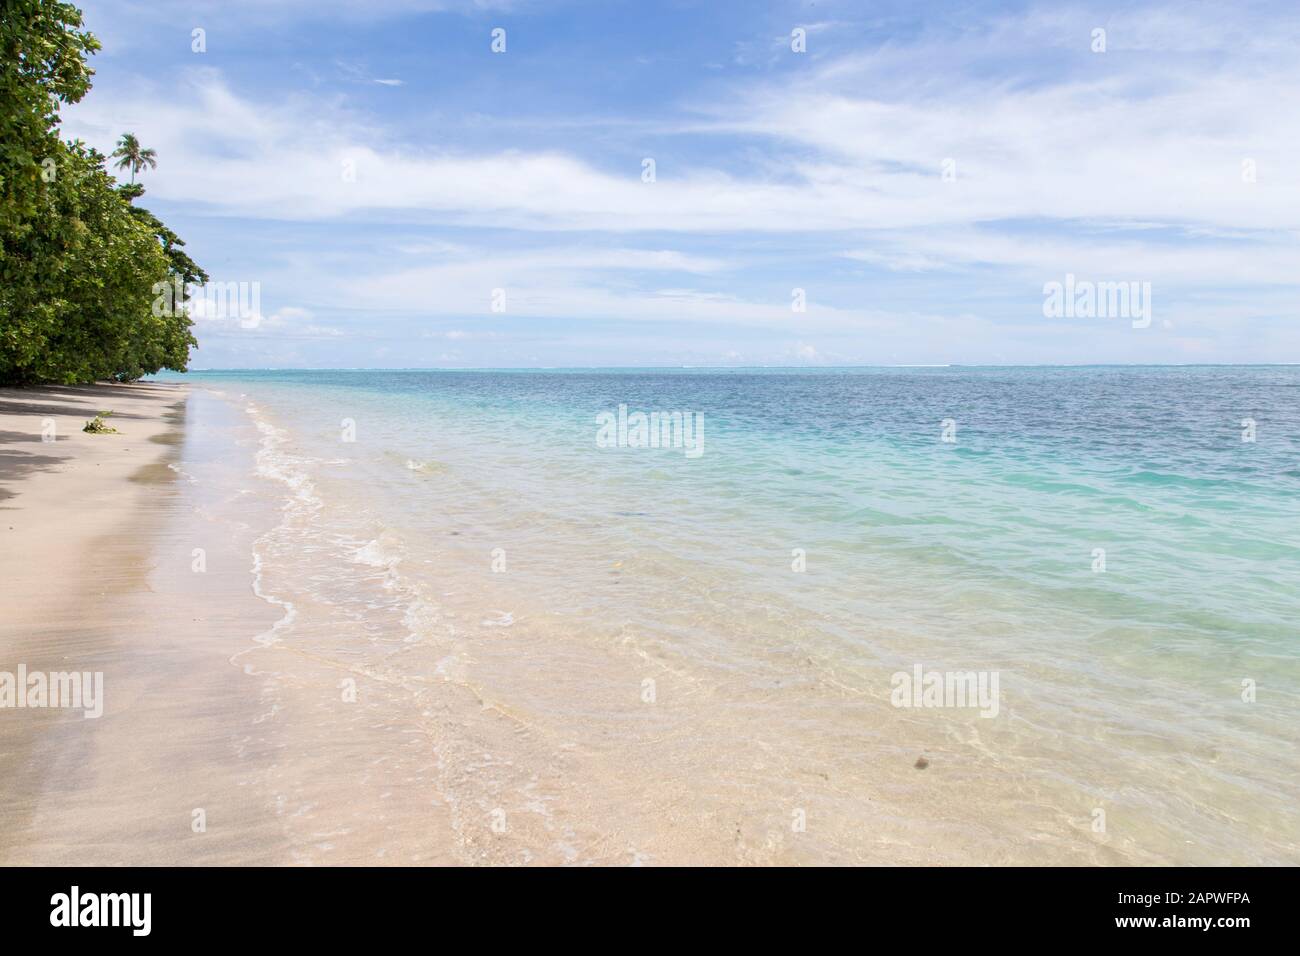 Empty pink sandy beach with clear blue waters in South Pacific island Stock Photo